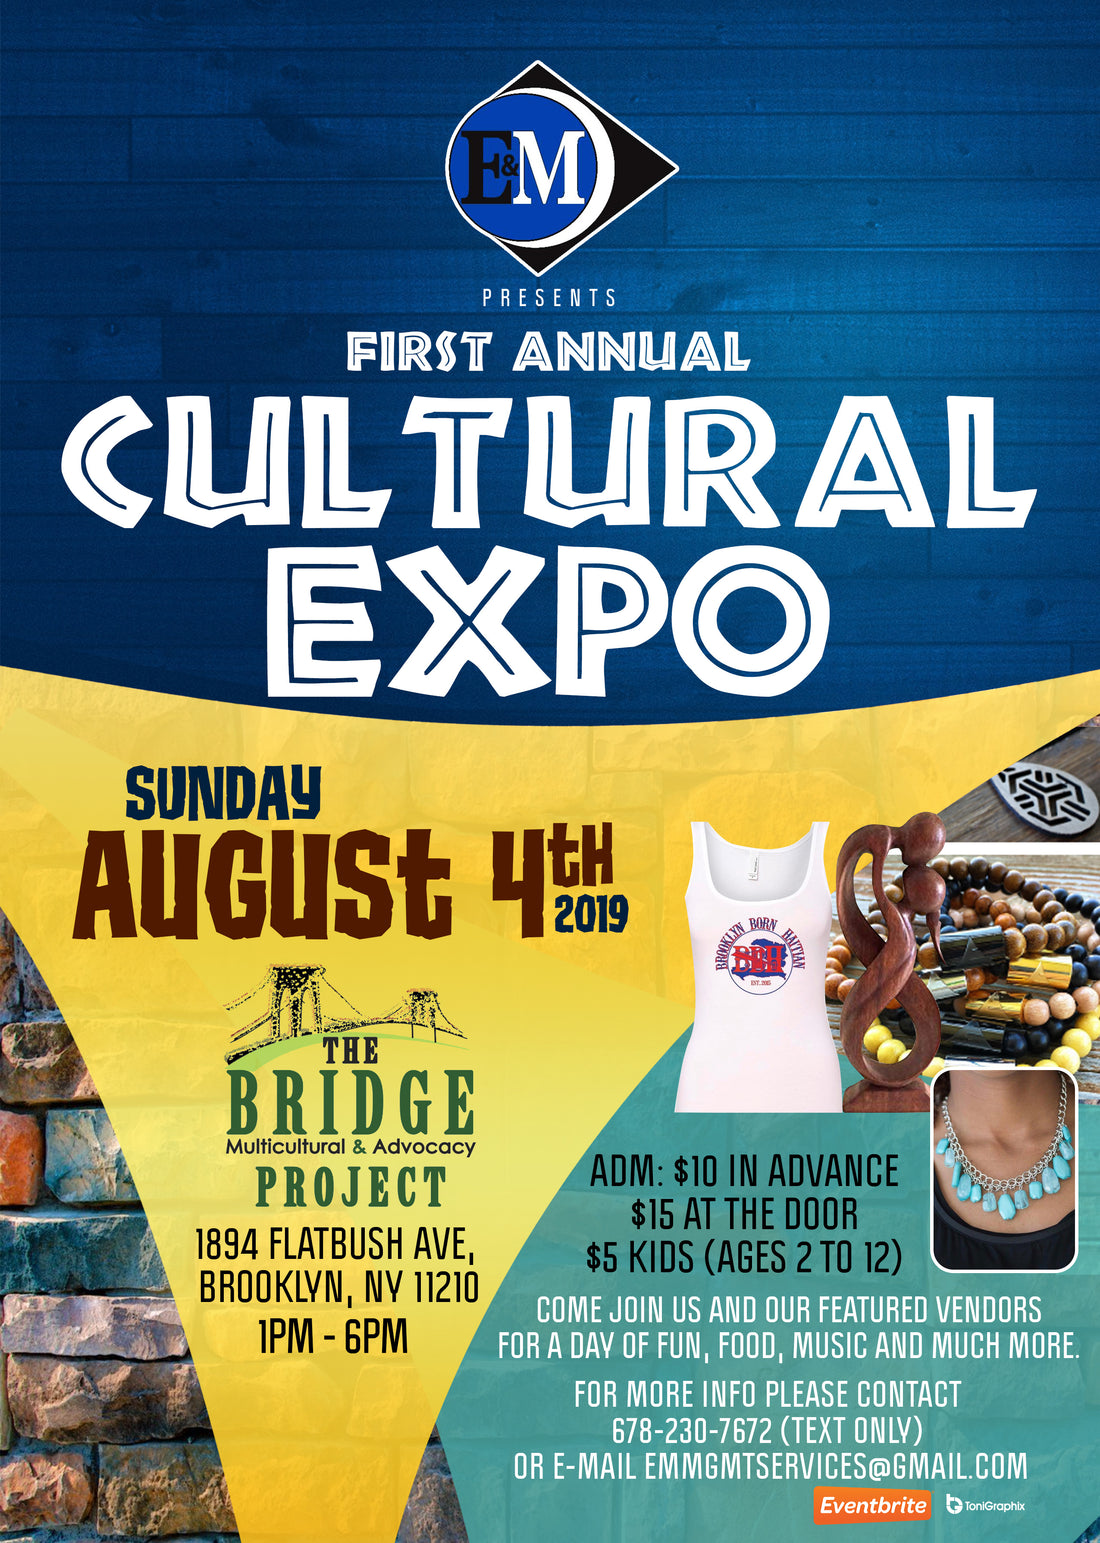 1st Annual Cultural Expo